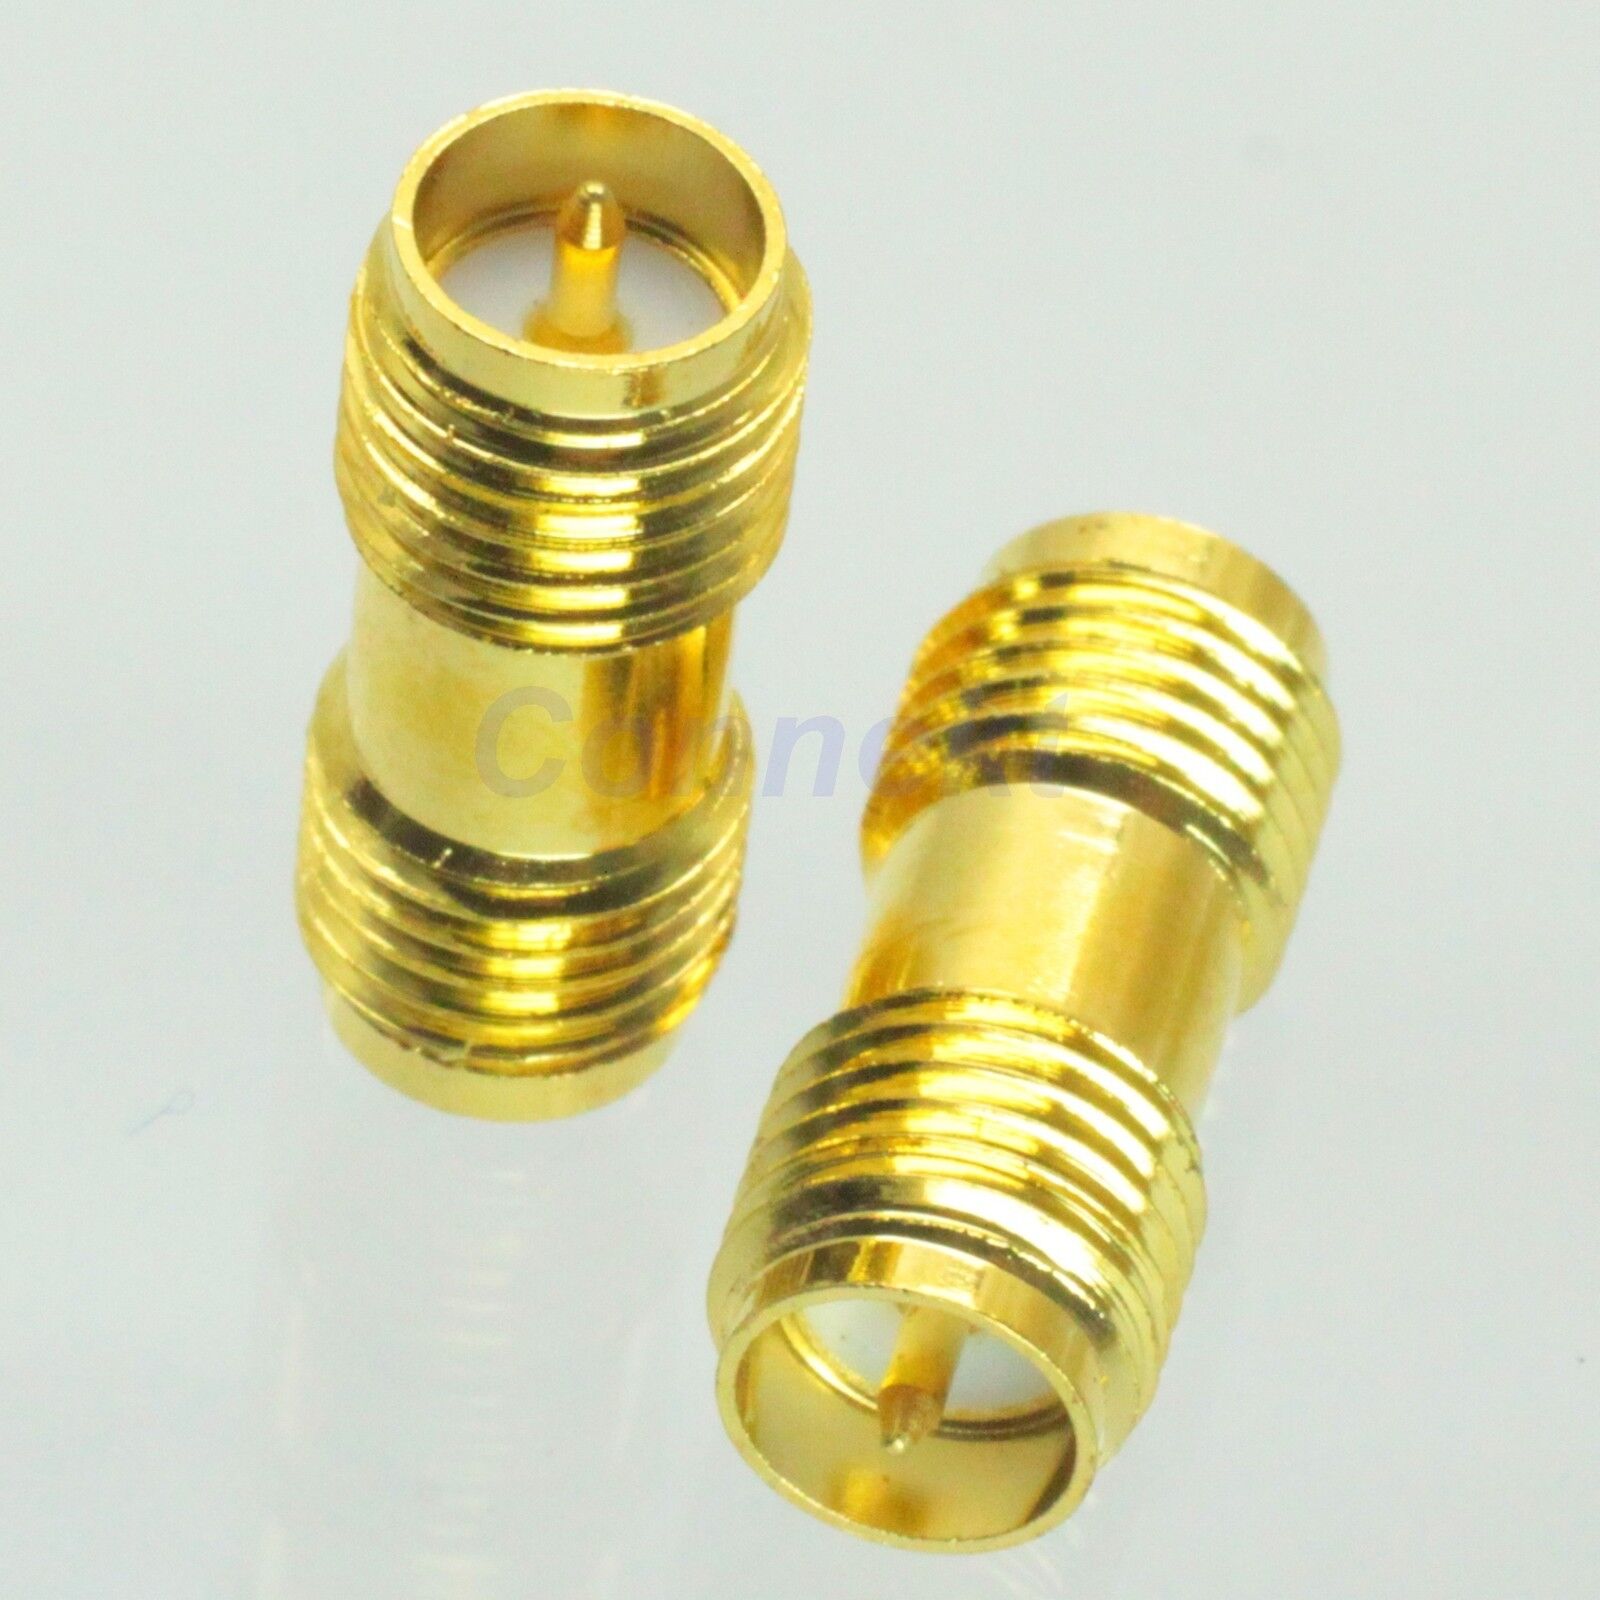 10pcs RP-SMA female plug to Dealing full price reduction Free shipping in c RF series adapter